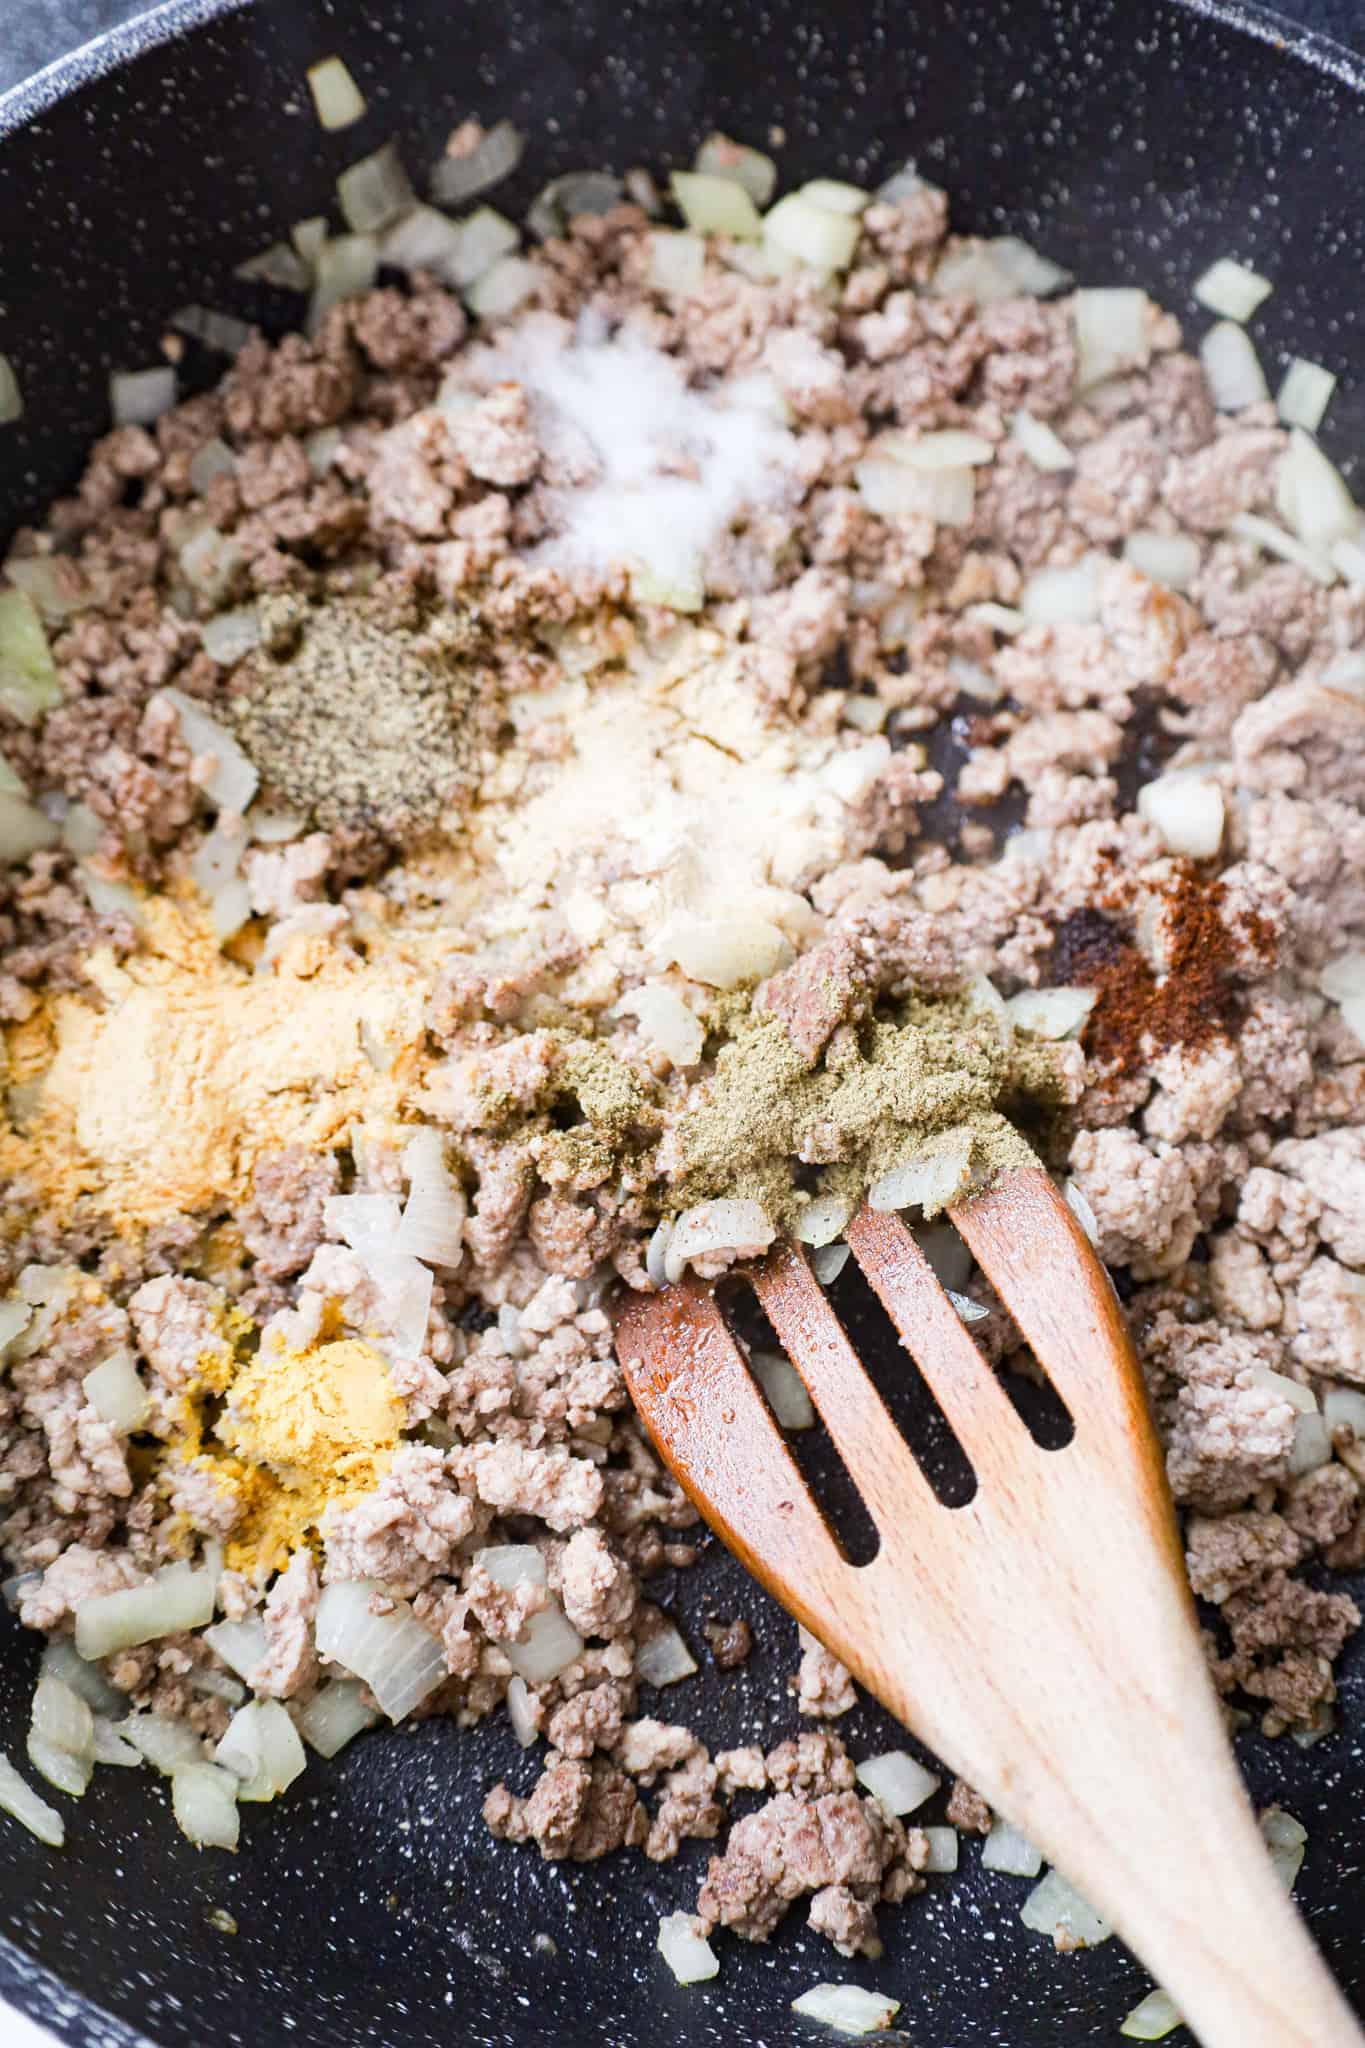 spices on top of cooked ground beef and ground pork in a saute pan